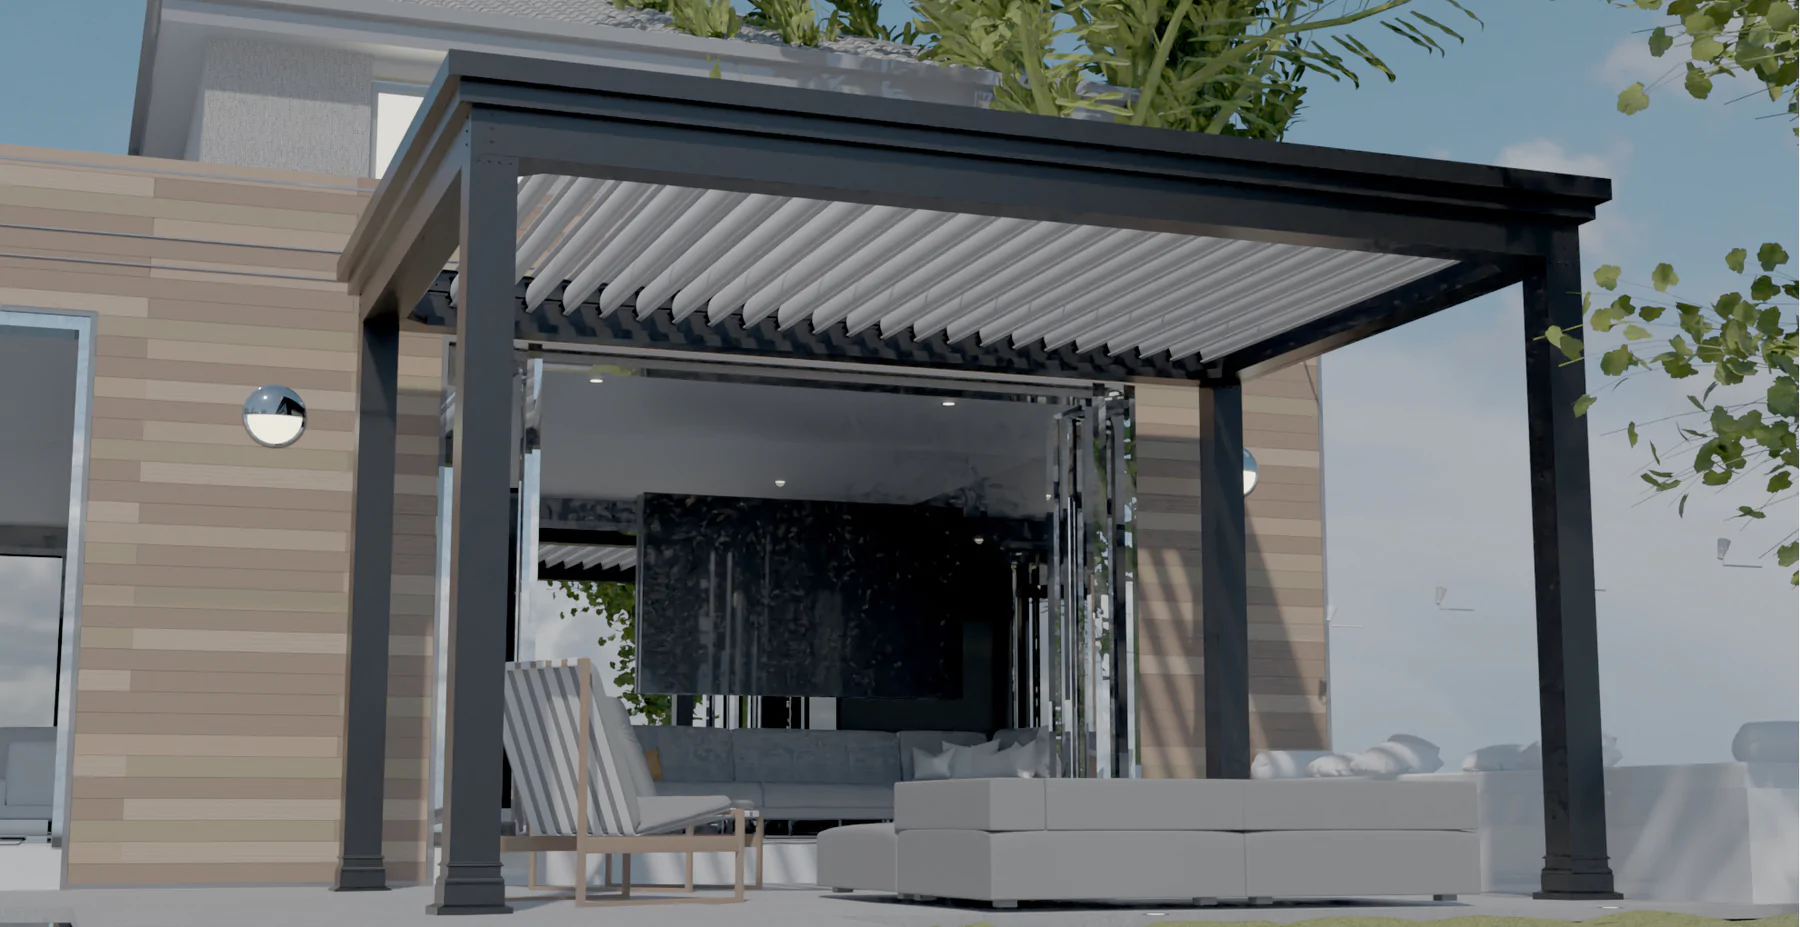 Get Access To Styles And Materials Quality Information On The Luxury Pergola Site